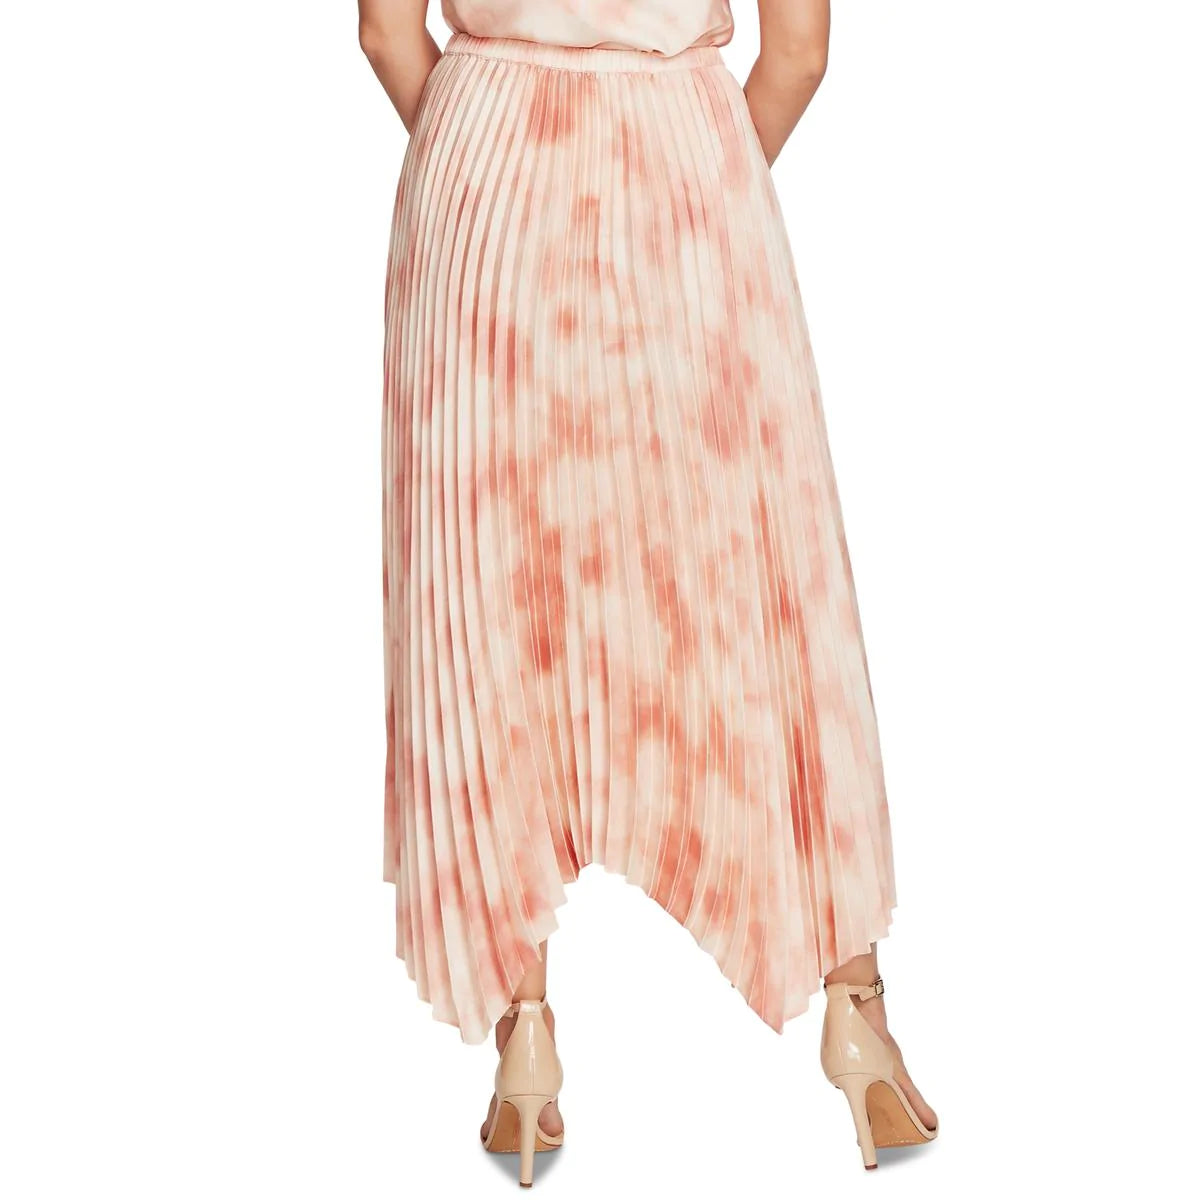 VINCE CAMUTO Women's Tie Dye Pleated Skirt in Tuberose Pink